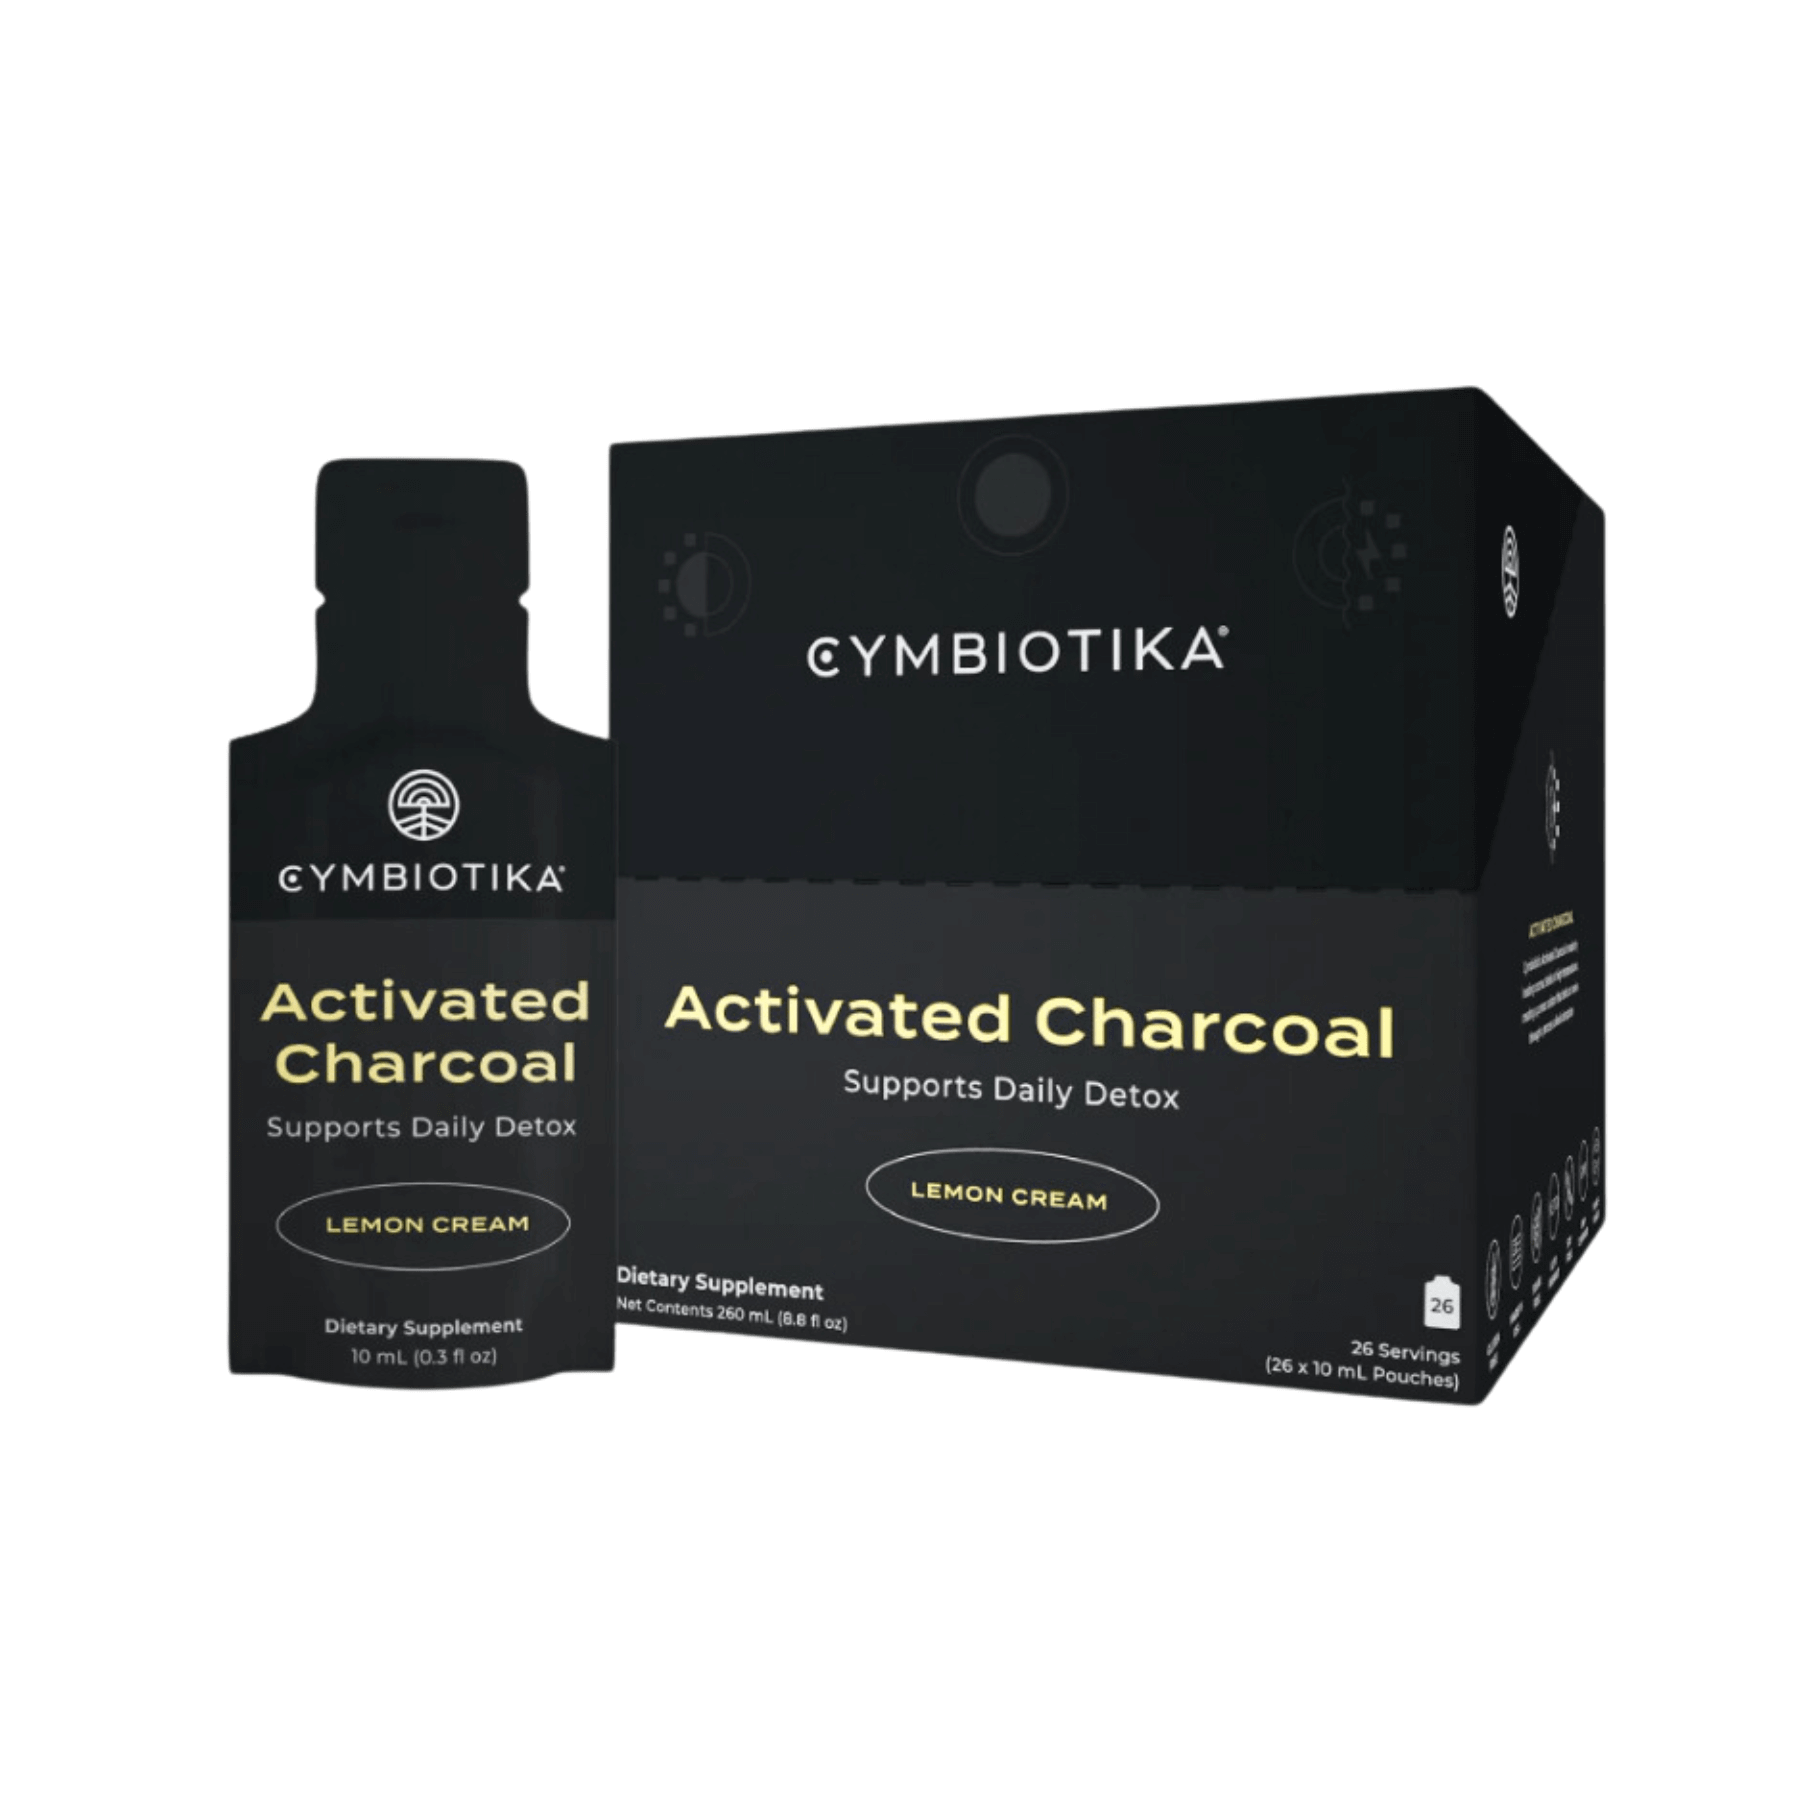 Image of cymbiotika activated charcoal packets for detox